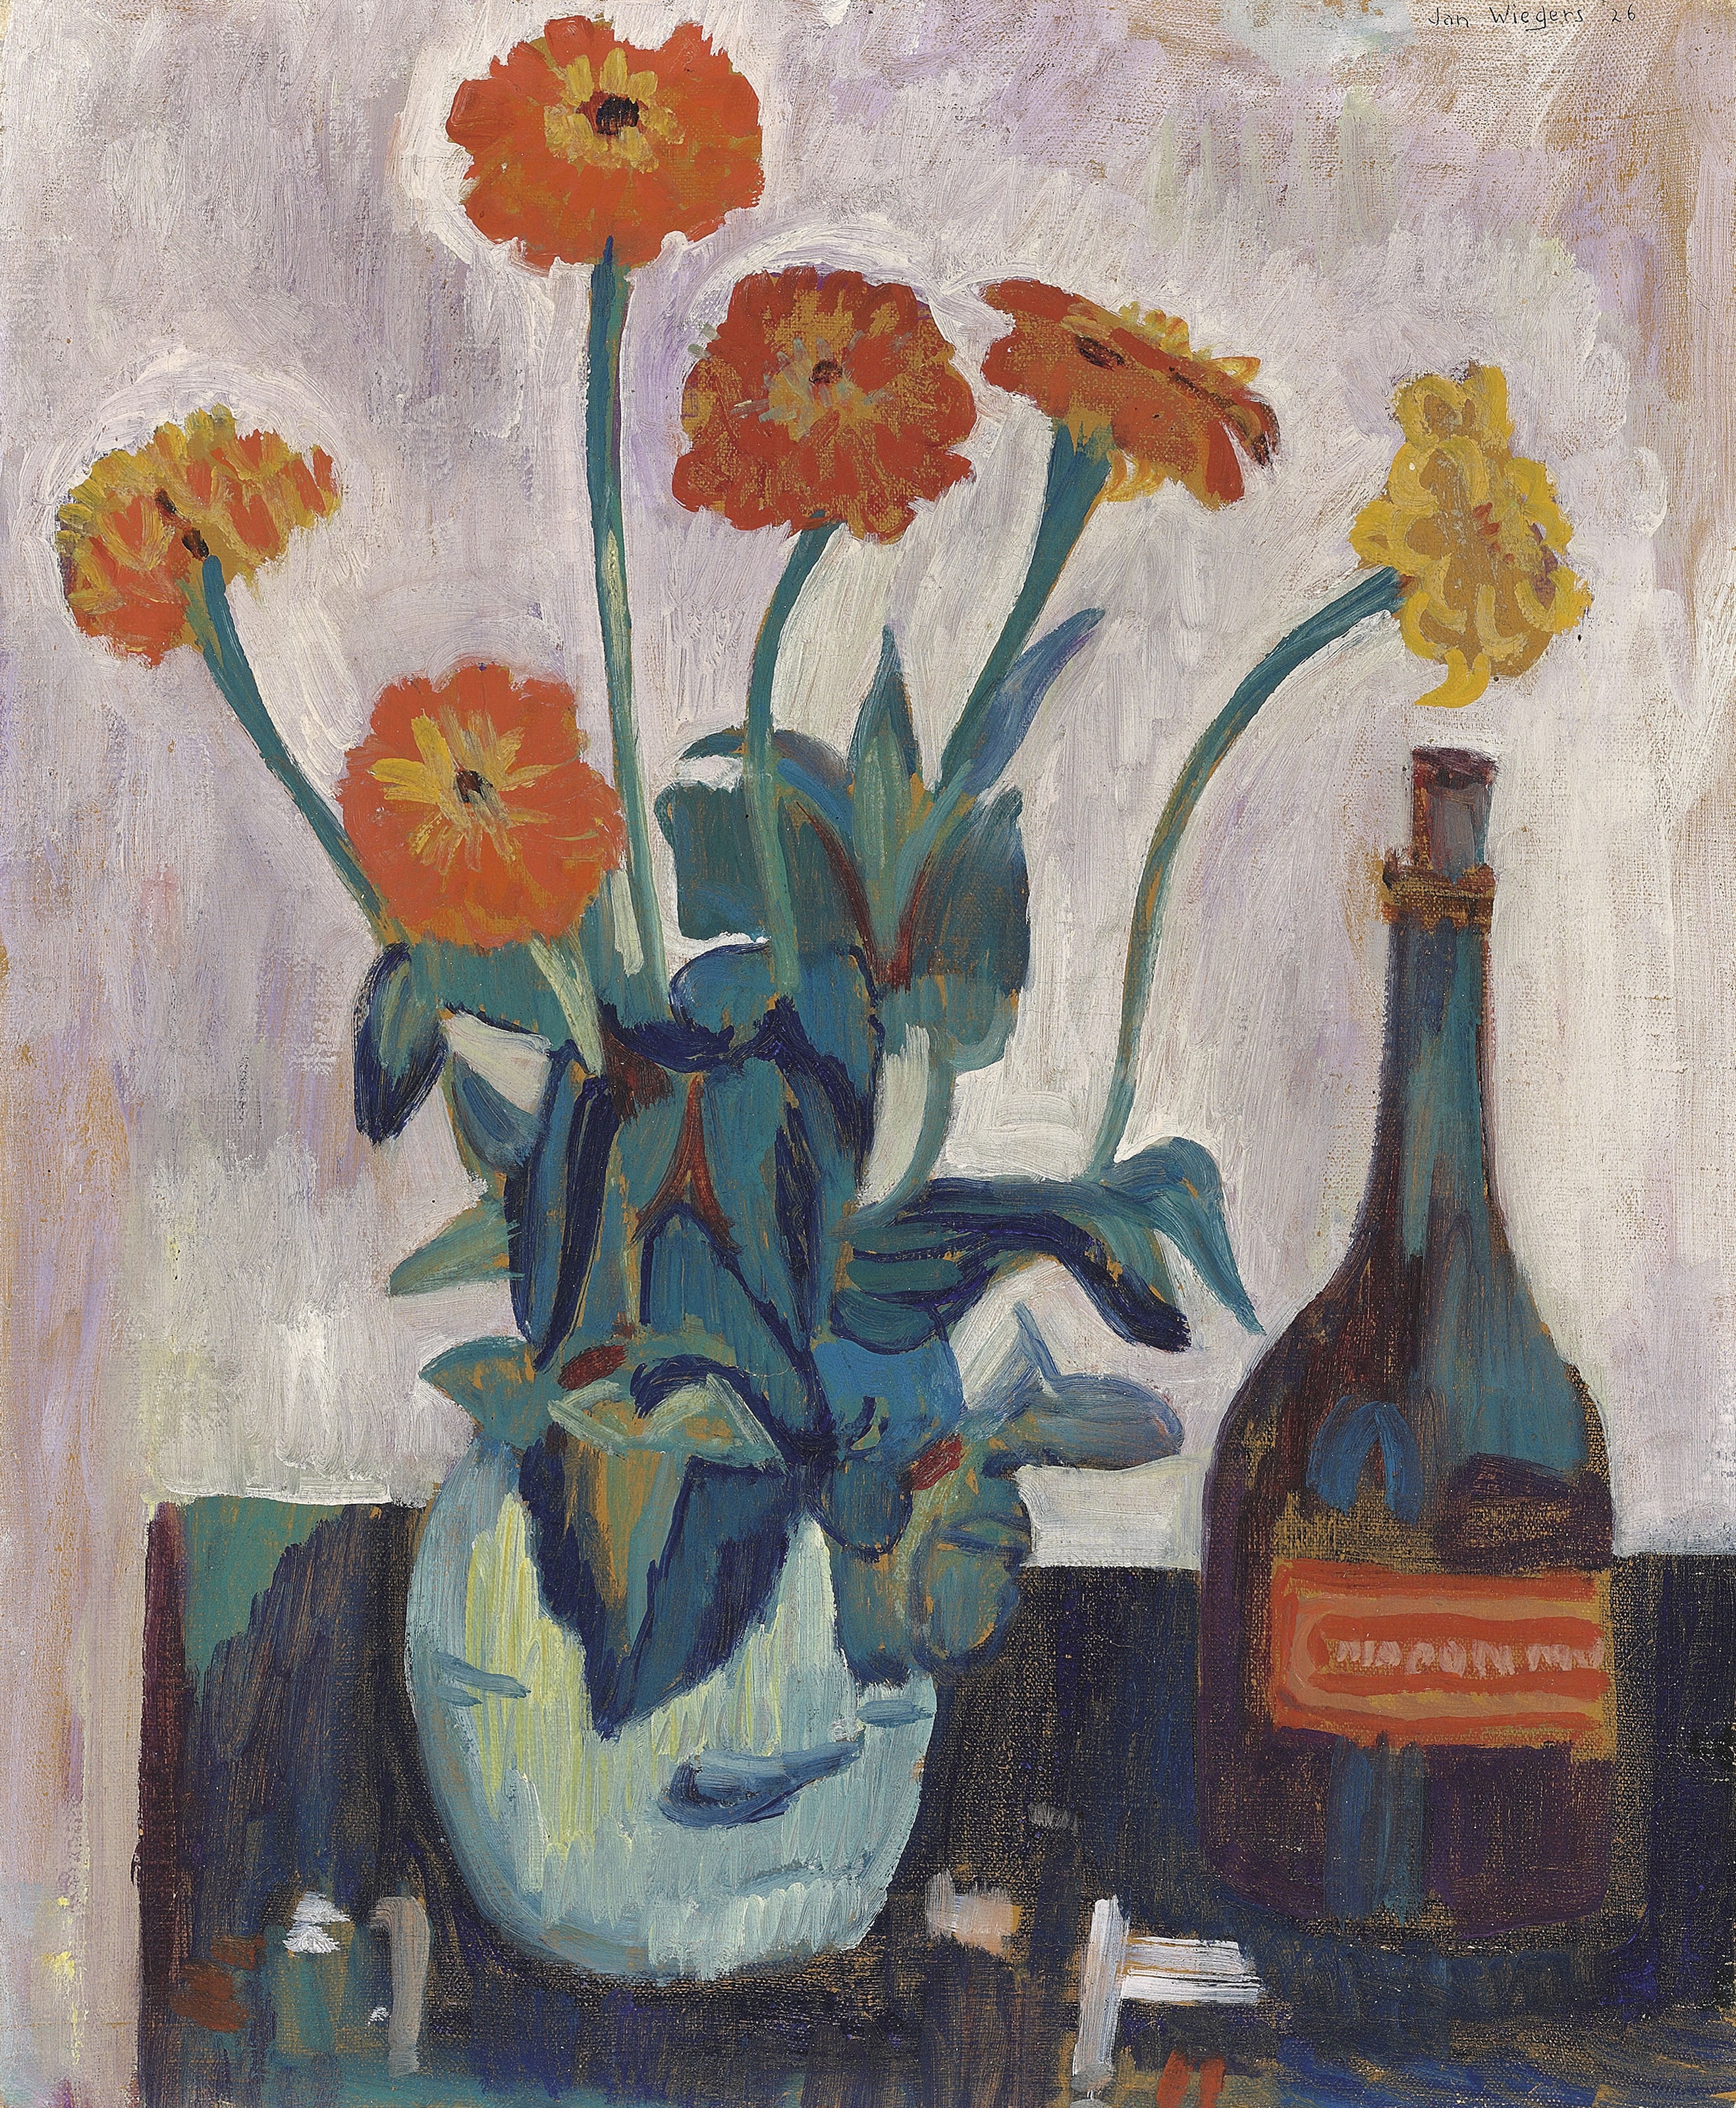 Still life with vase of zinnias and a bottle by Jan Wiegers, 1926